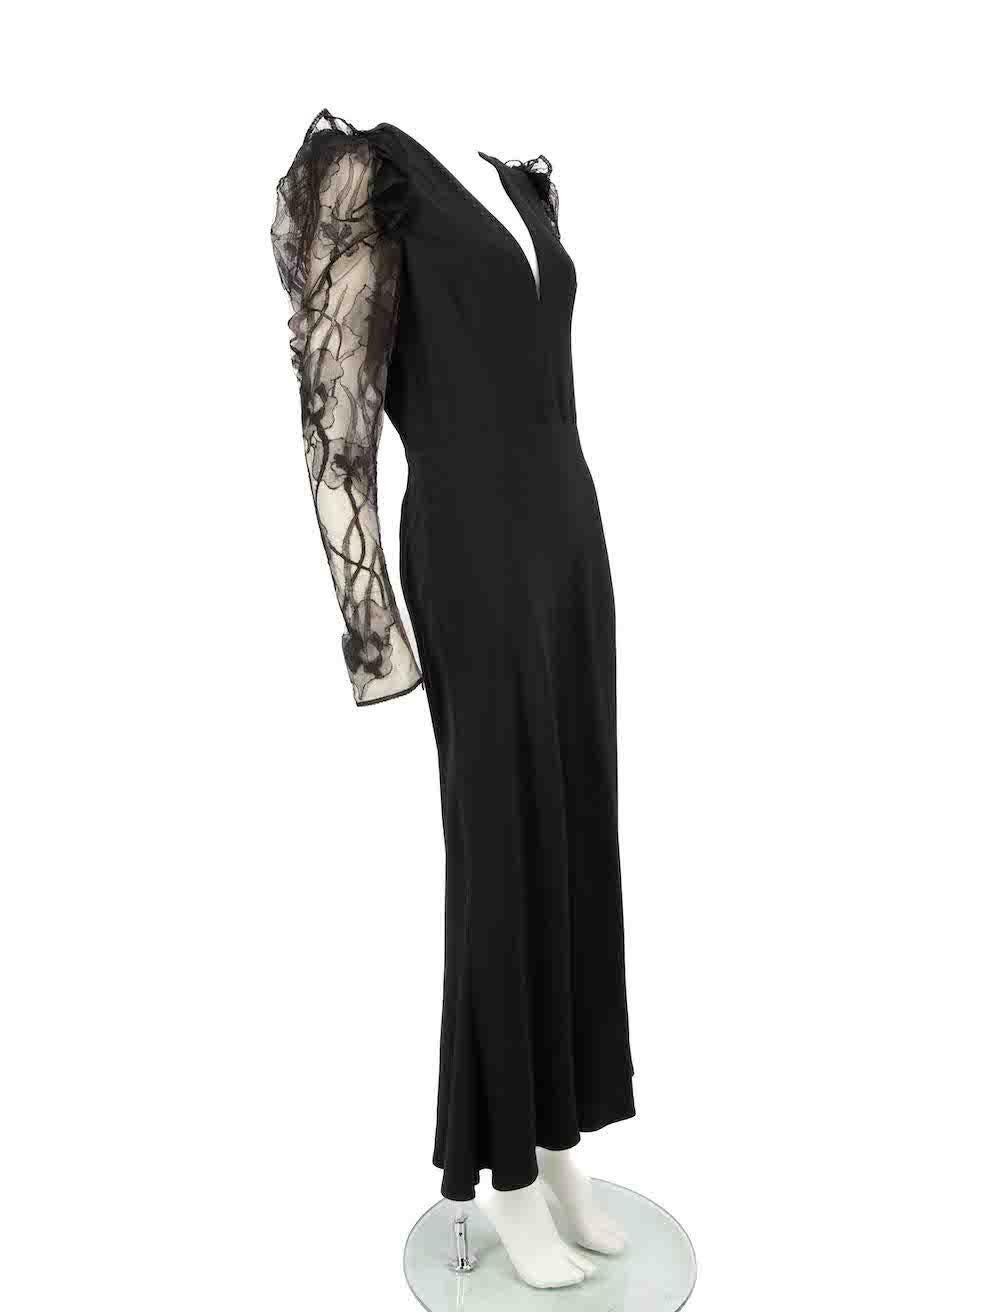 CONDITION is Very good. Minimal wear to dress is evident. Minimal small marks near the hem on this used Alexander McQueen designer resale item.
 
 
 
 Details
 
 
 Black
 
 Viscose
 
 Dress
 
 Maxi
 
 Long sheer lace sleeves
 
 Back zip and hook